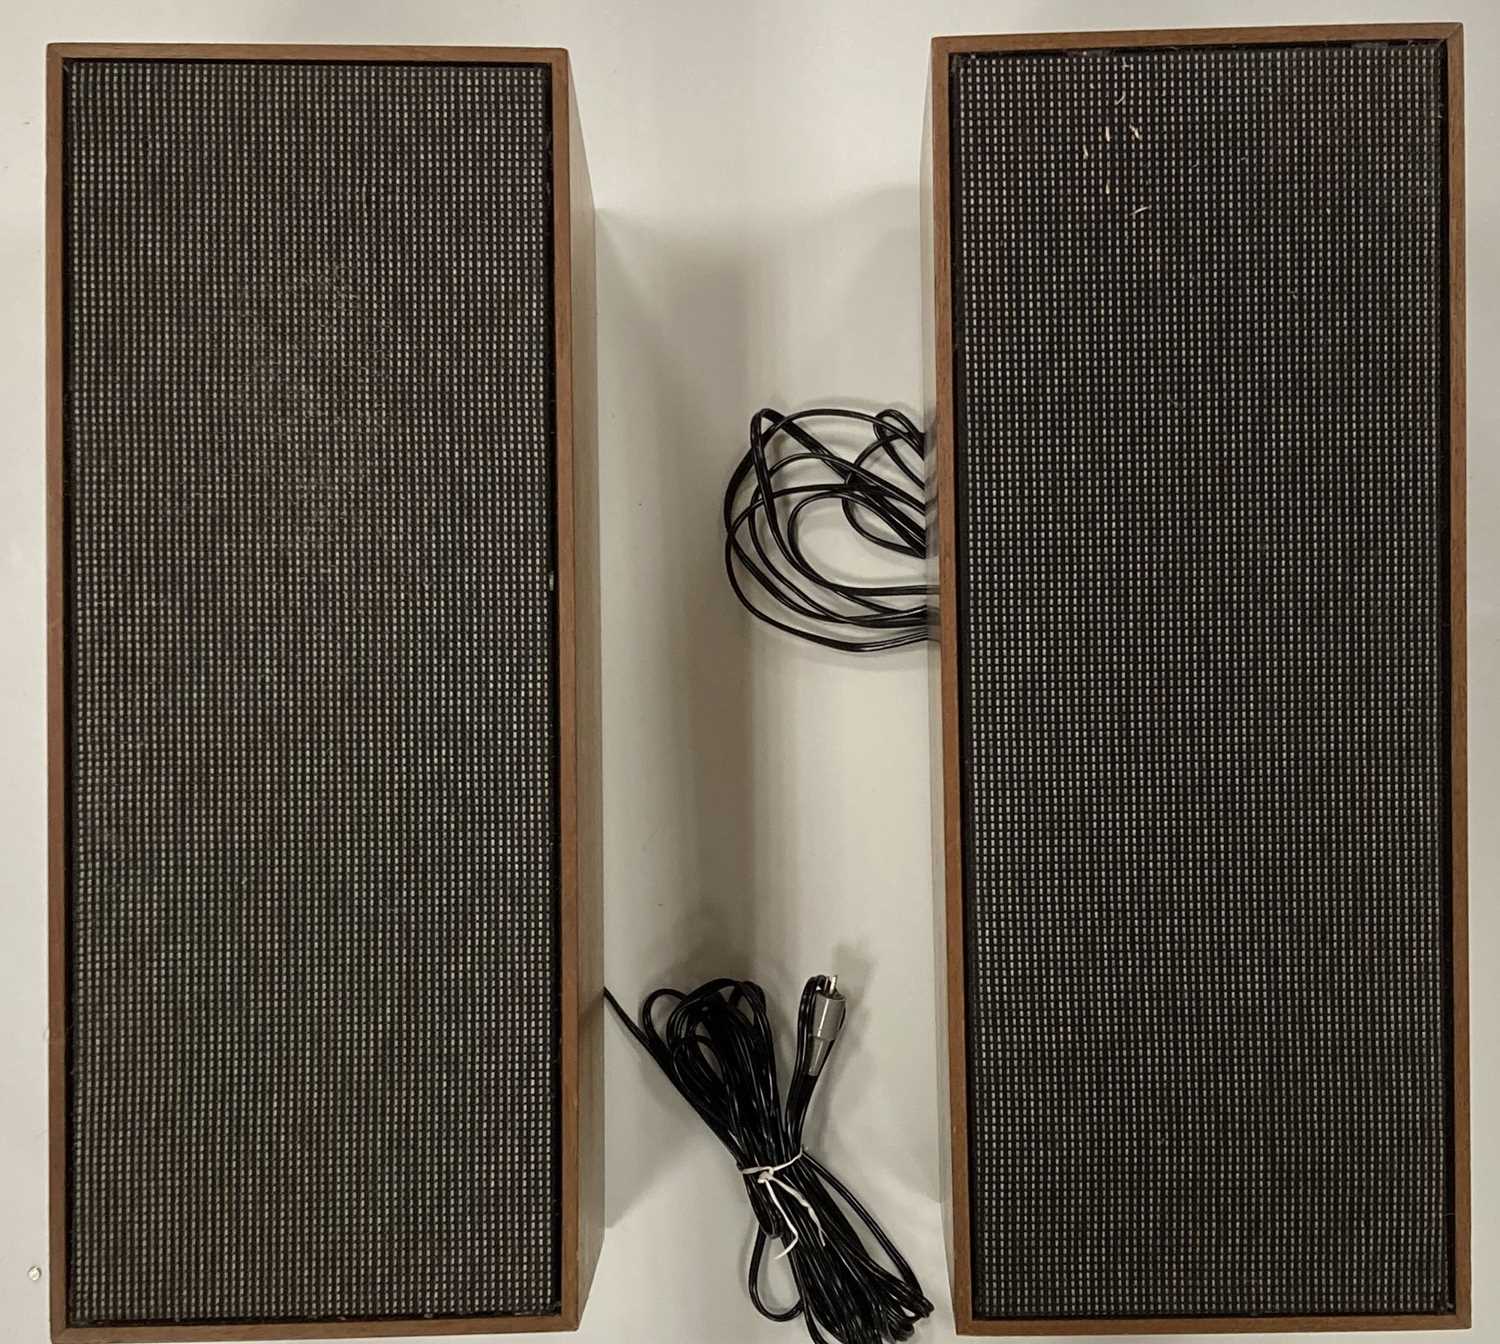 Lot 1 - BANG AND OLUFSEN BEOMASTER AND SPEAKERS